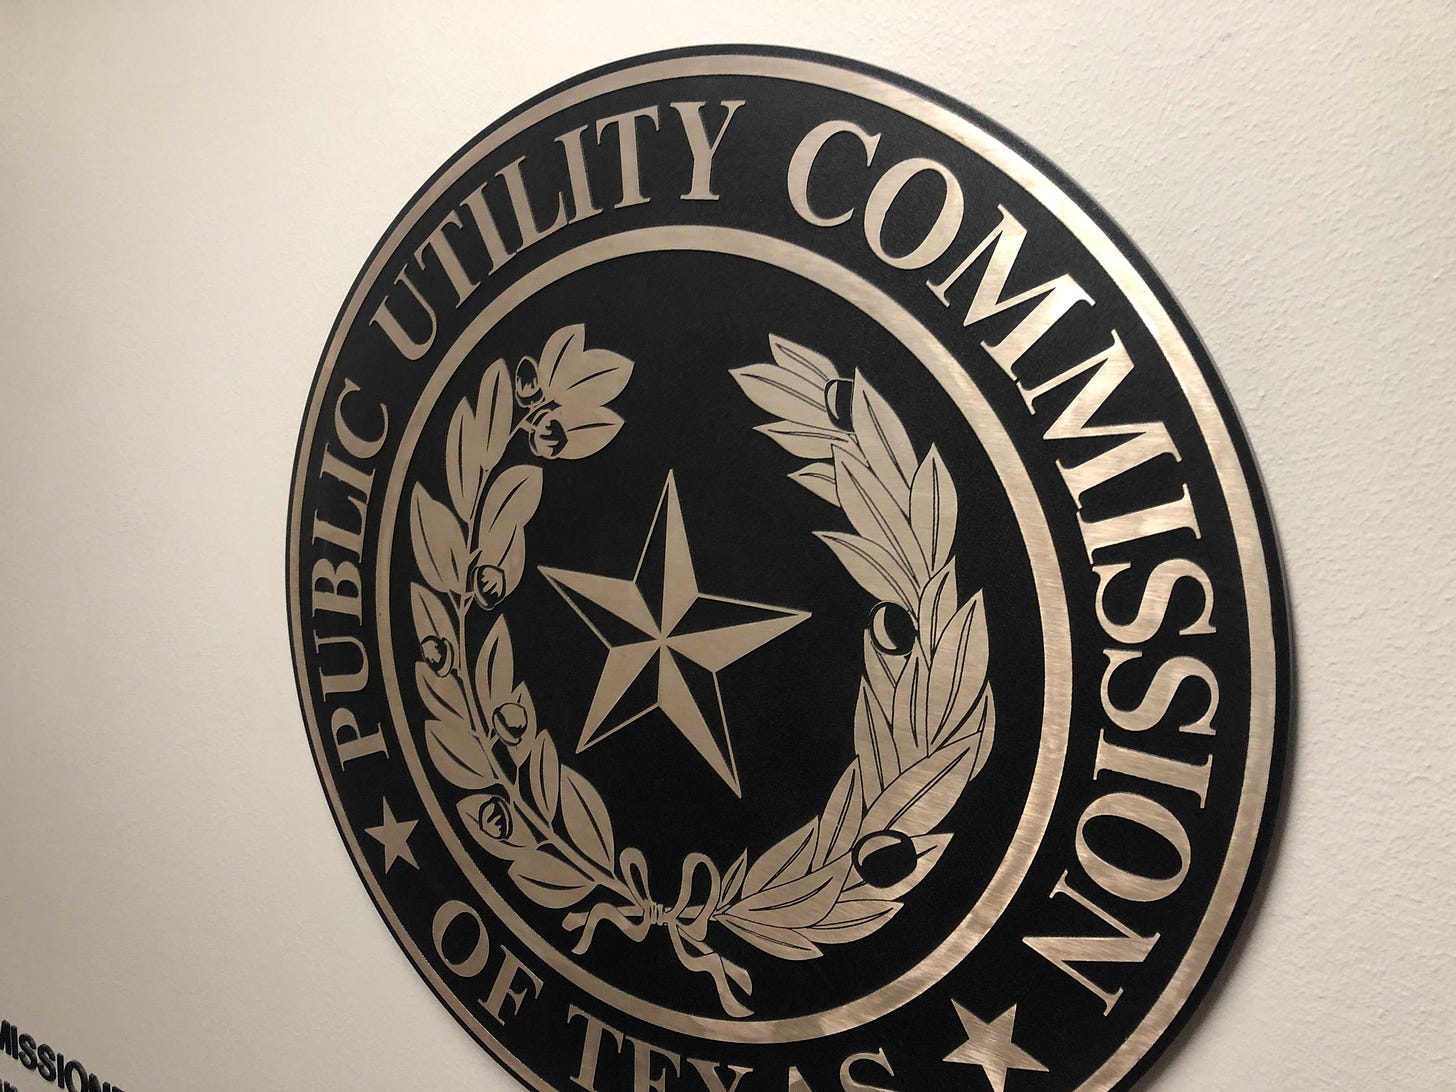 Public Utility Commission of Texas calls for 'voluntary power conservation'  | KXAN Austin